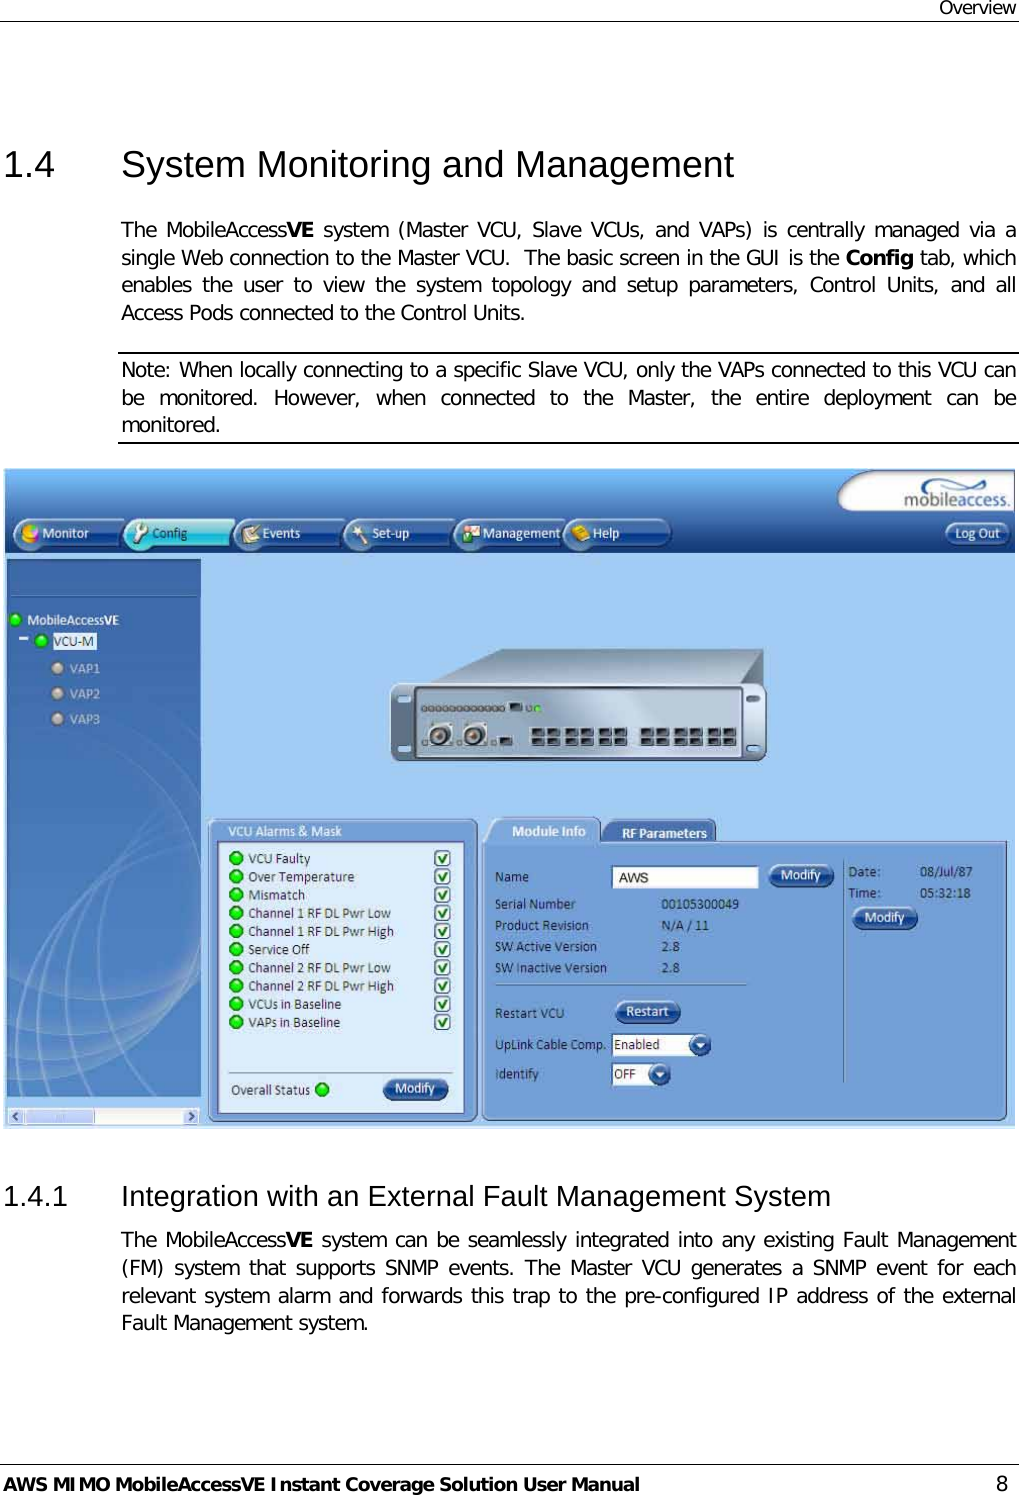 Overview AWS MIMO MobileAccessVE Instant Coverage Solution User Manual  8  1.4  System Monitoring and Management The MobileAccessVE system (Master VCU, Slave VCUs, and VAPs) is centrally managed via a single Web connection to the Master VCU.  The basic screen in the GUI is the Config tab, which enables the user to view the system topology and setup parameters, Control Units,  and all Access Pods connected to the Control Units. Note: When locally connecting to a specific Slave VCU, only the VAPs connected to this VCU can be monitored.  However, when connected to the Master,  the entire deployment can be monitored.   1.4.1  Integration with an External Fault Management System The MobileAccessVE system can be seamlessly integrated into any existing Fault Management (FM) system that supports SNMP events. The Master VCU generates a SNMP event for each relevant system alarm and forwards this trap to the pre-configured IP address of the external Fault Management system.  